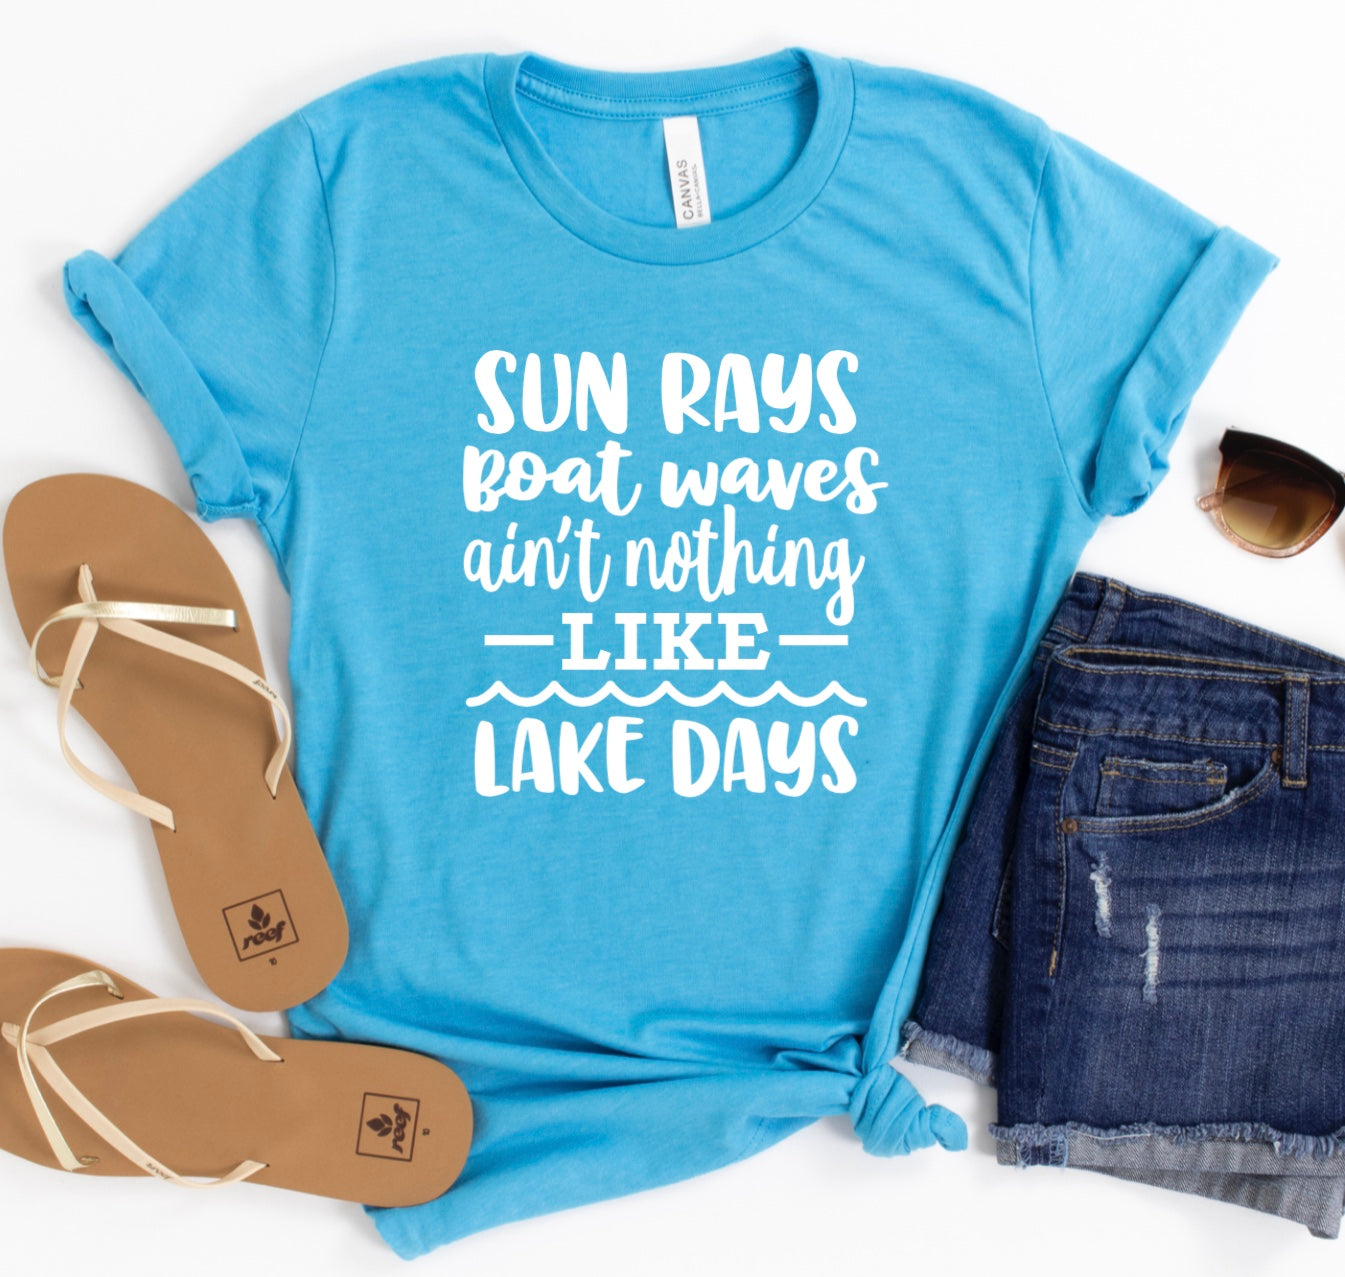 Sun rays boat waves ain’t nothing like lake days t-shirt 